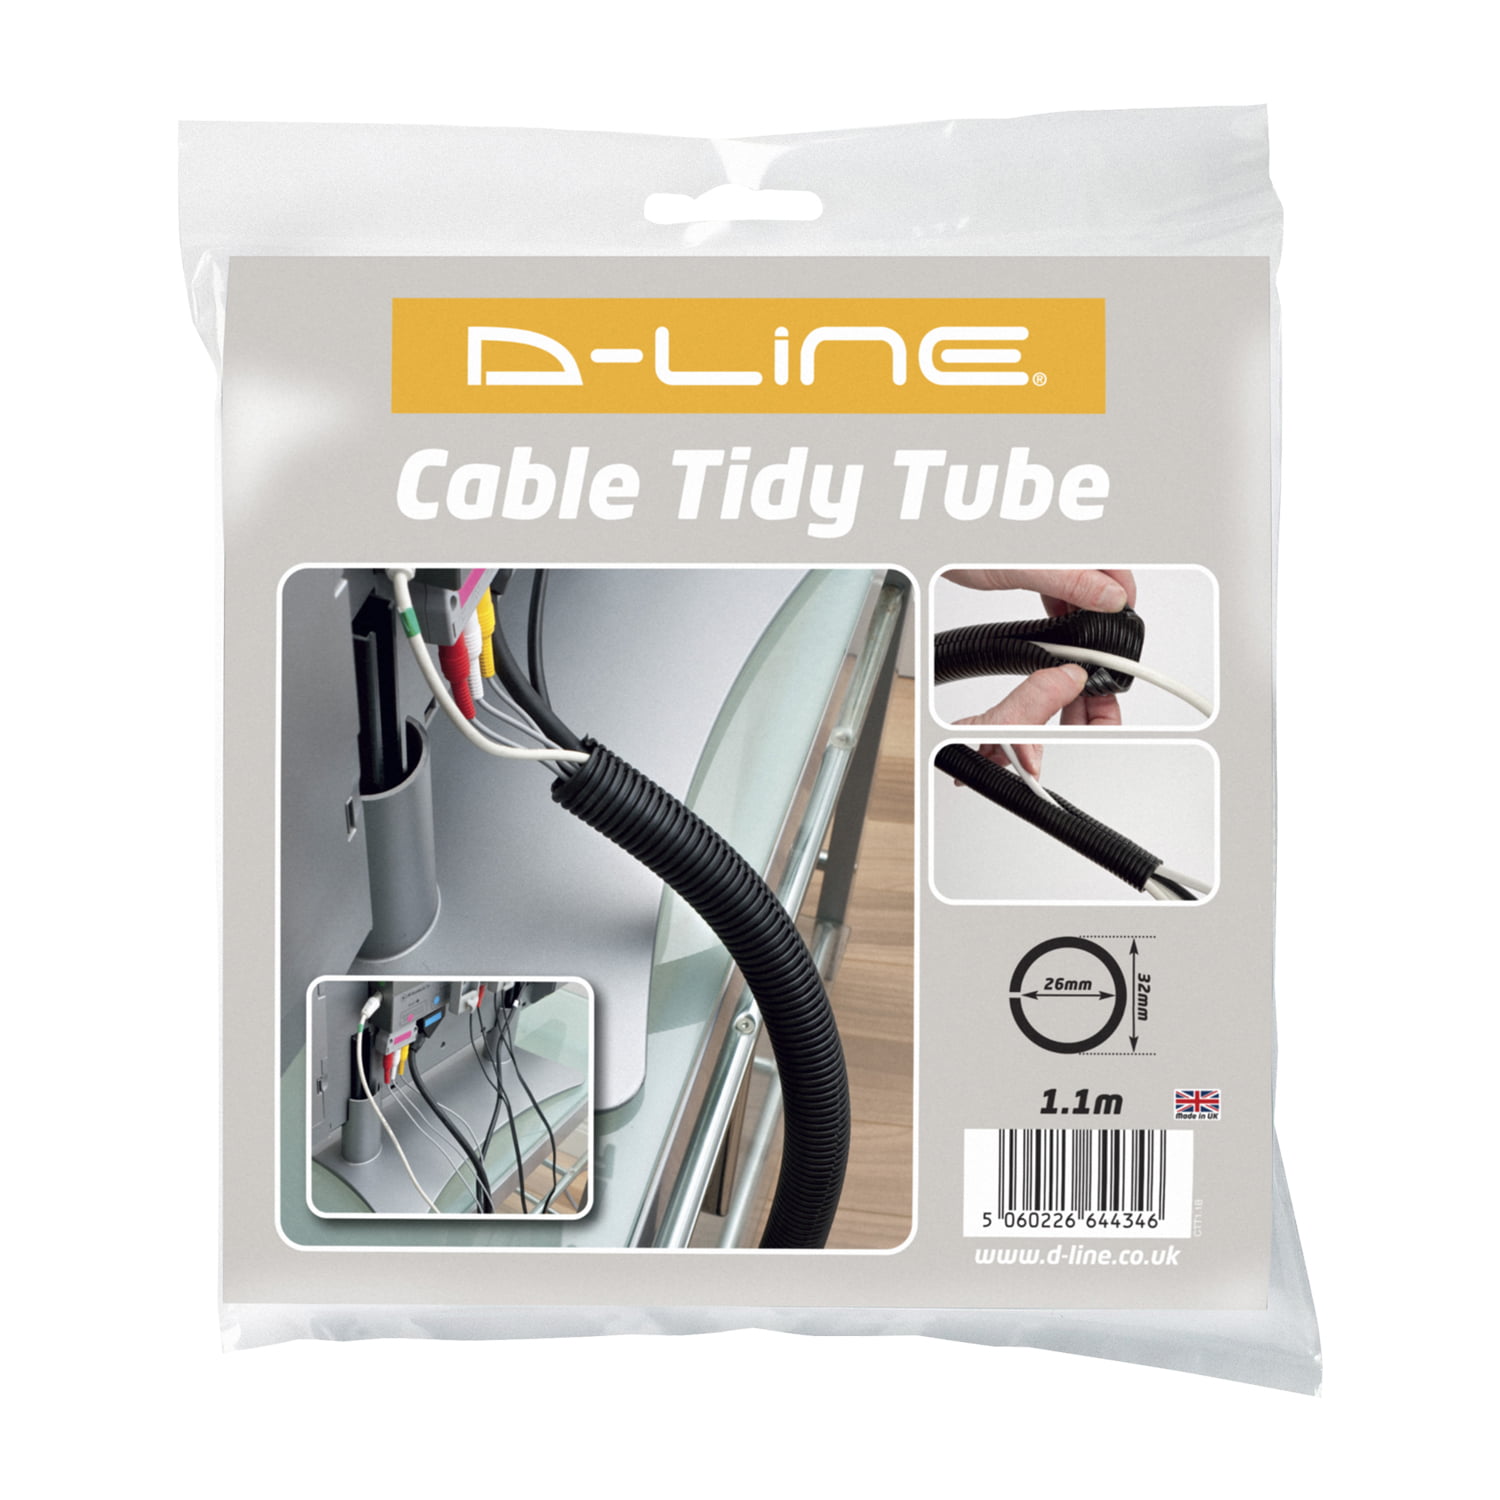 TubeCaddy - Medical Tubes, Cords & Cable Management Solution